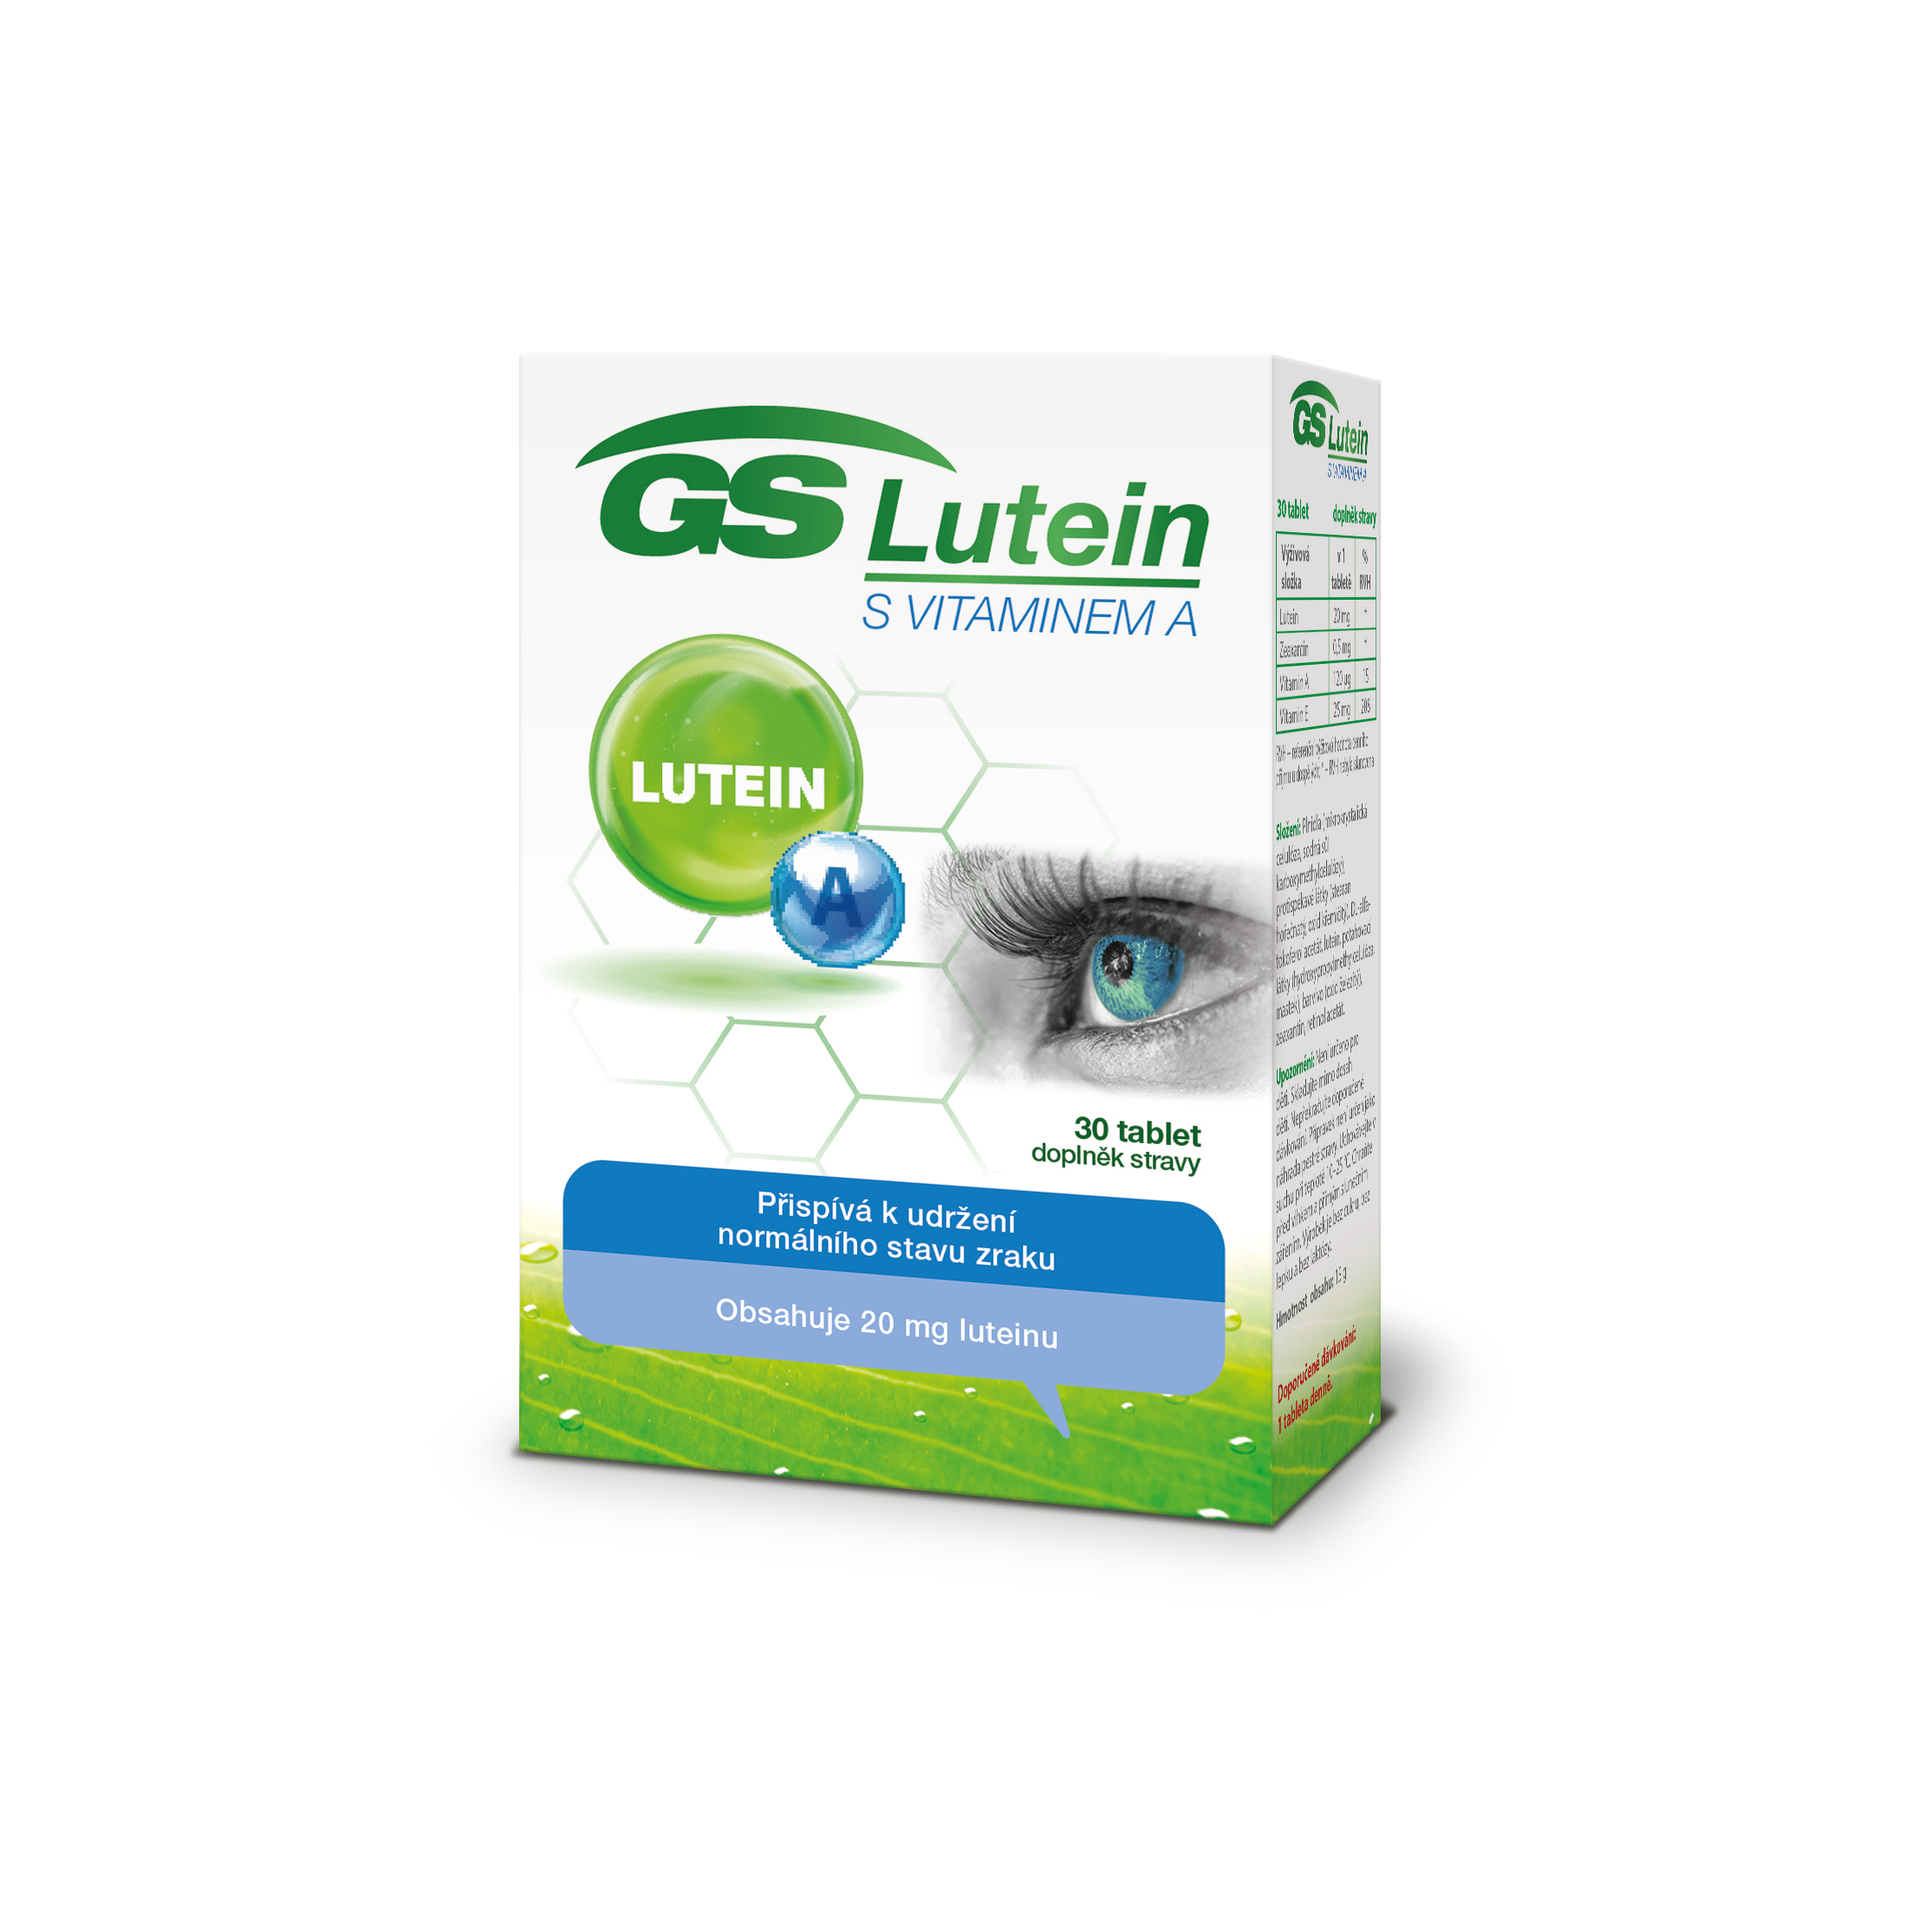 GS Lutein s vitaminem A, 30 tablet